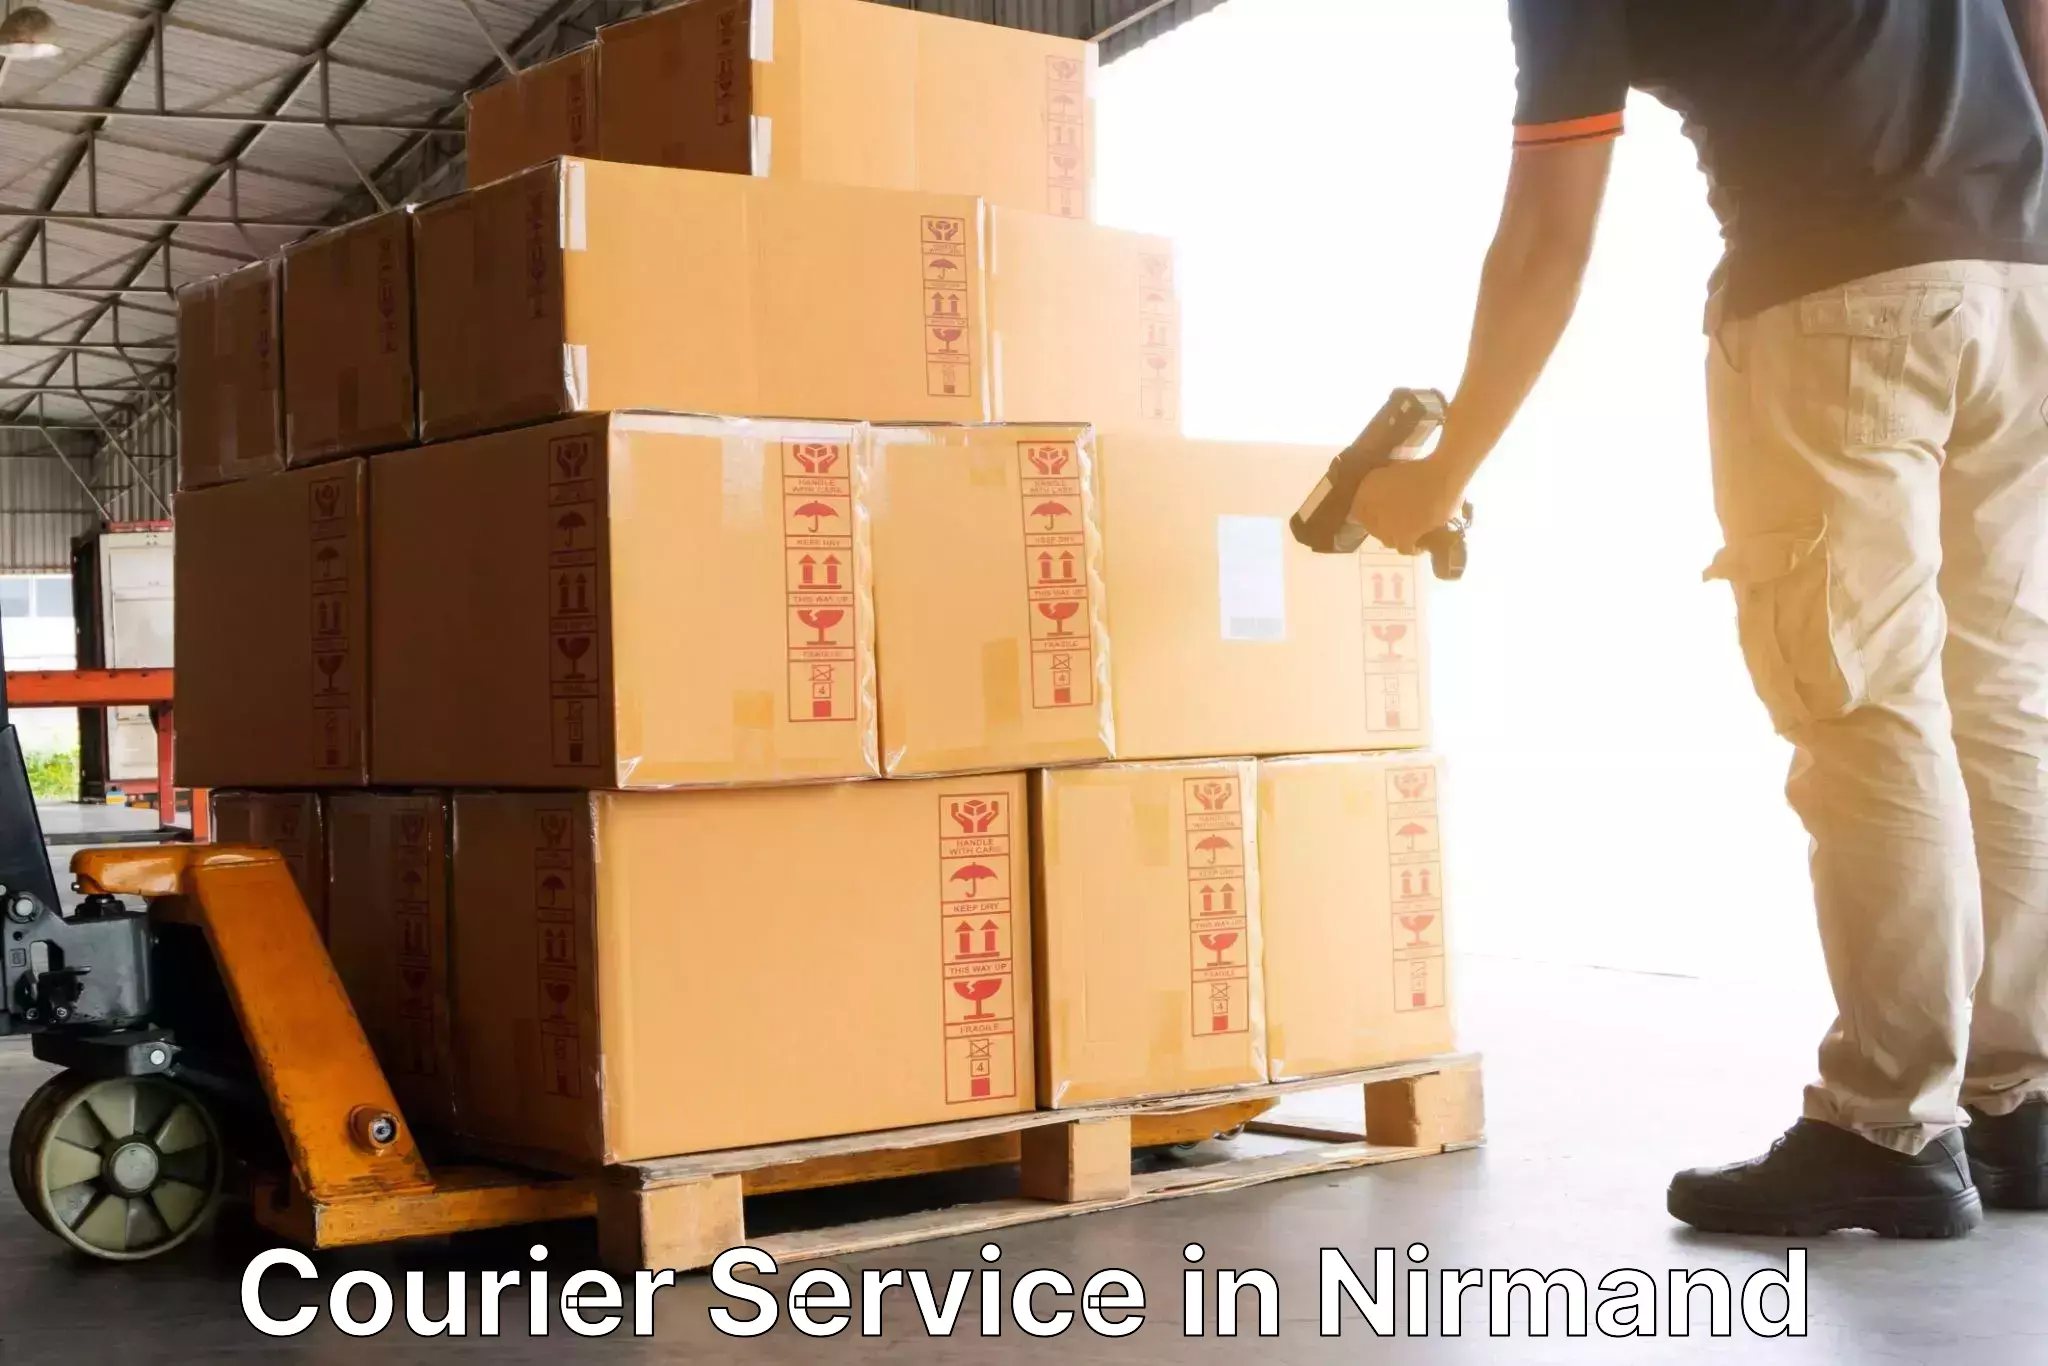 Sustainable shipping practices in Nirmand